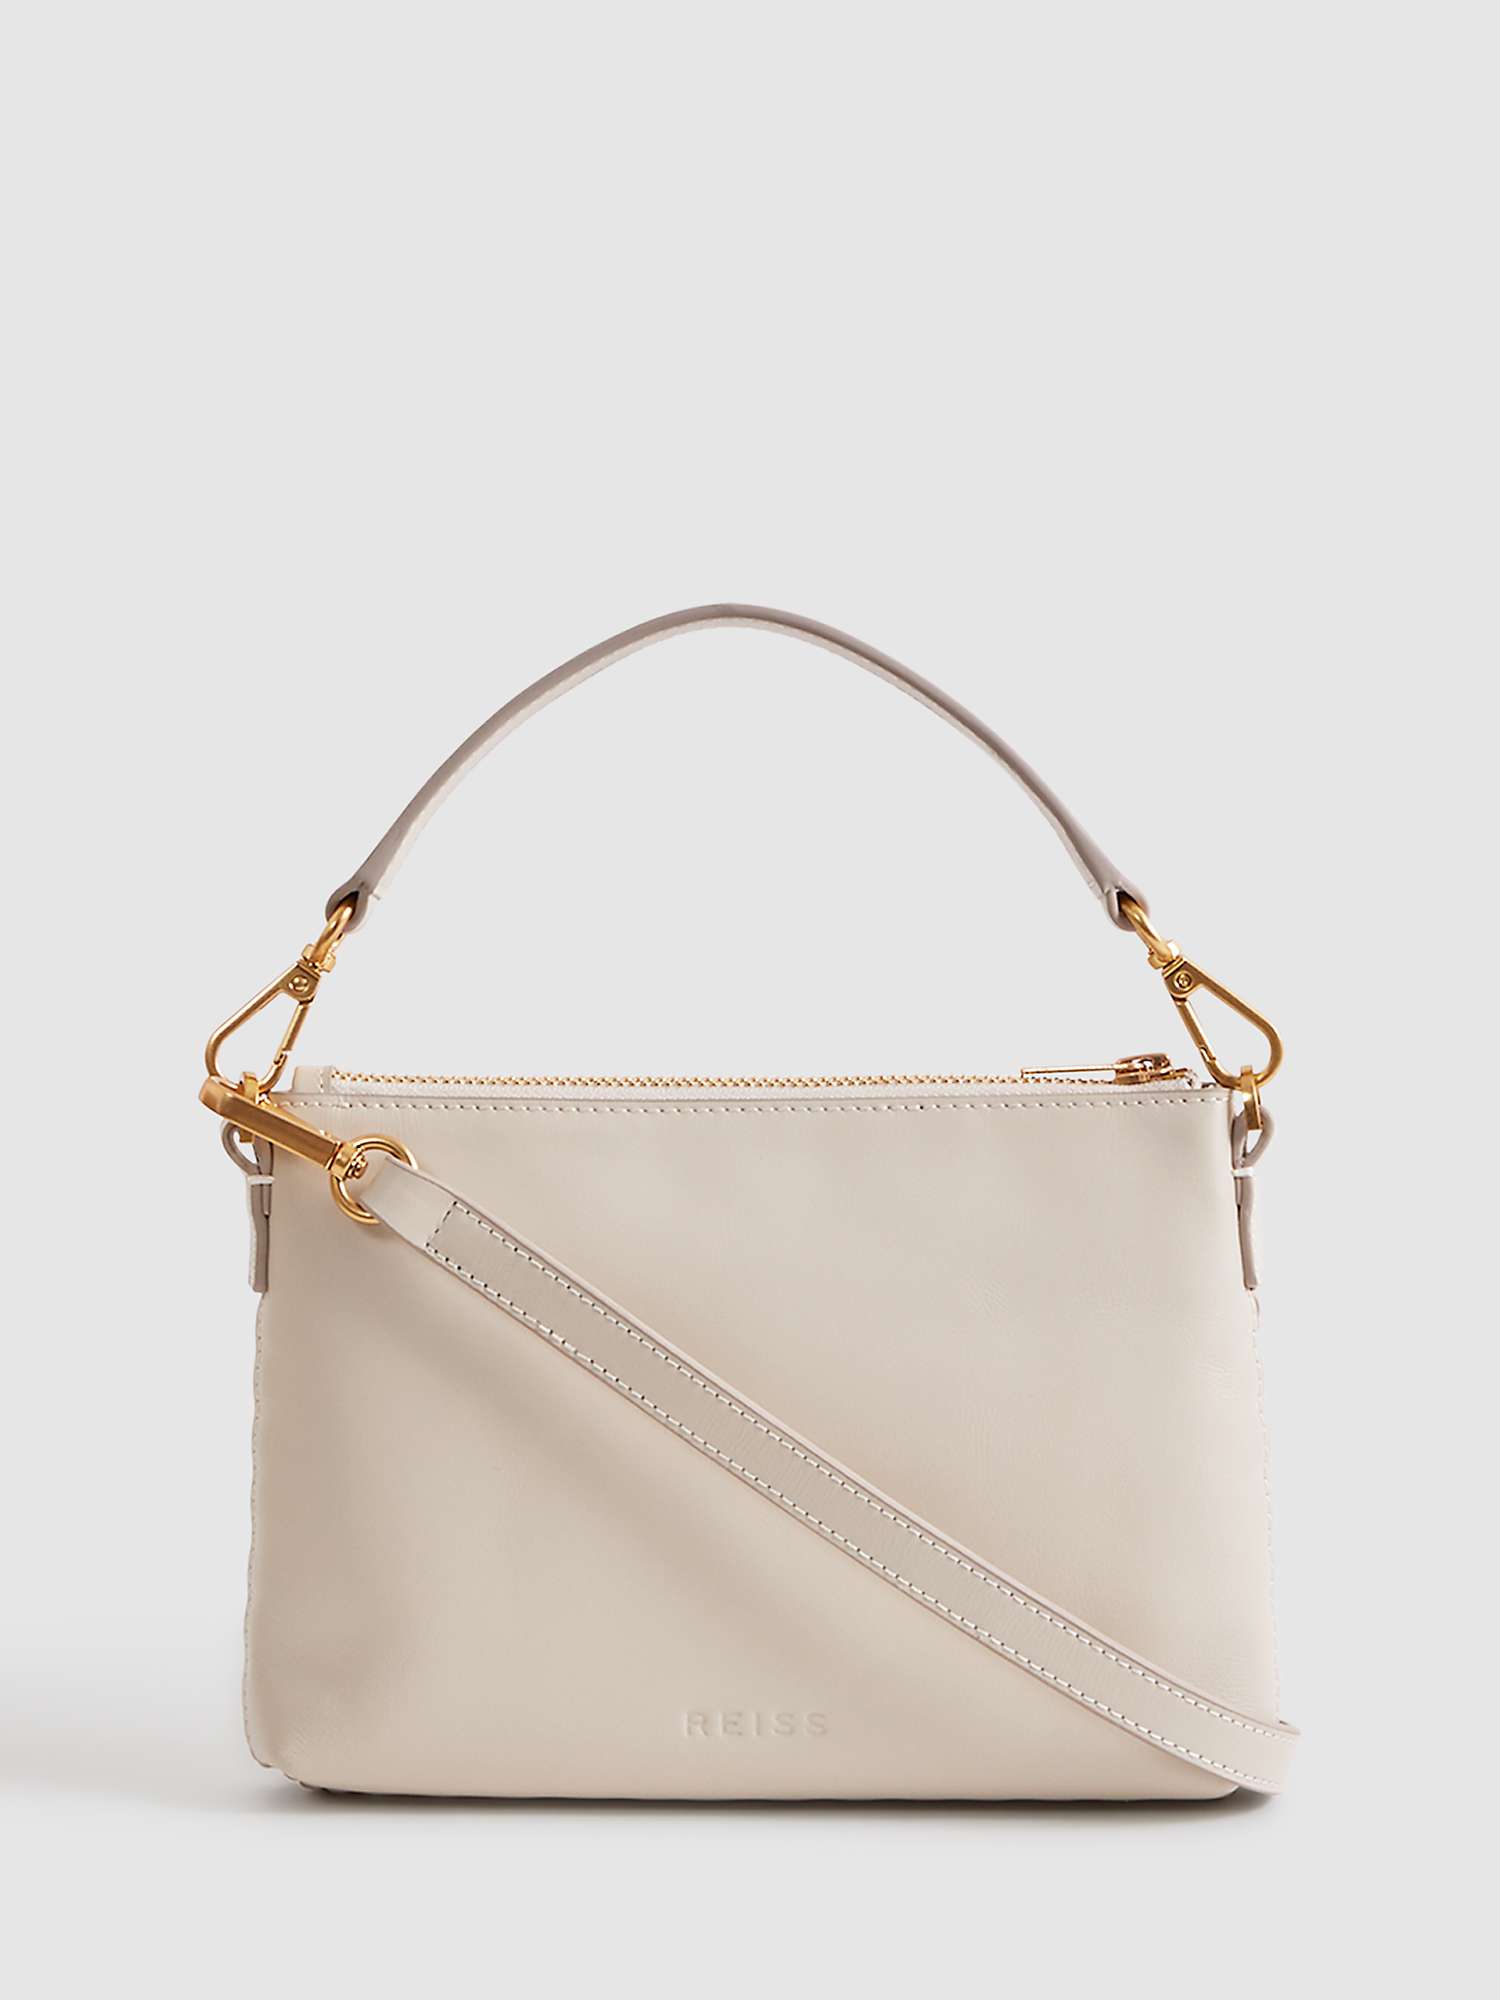 Buy Reiss Brompton Woven Leather Shoulder Bag, Stone Online at johnlewis.com